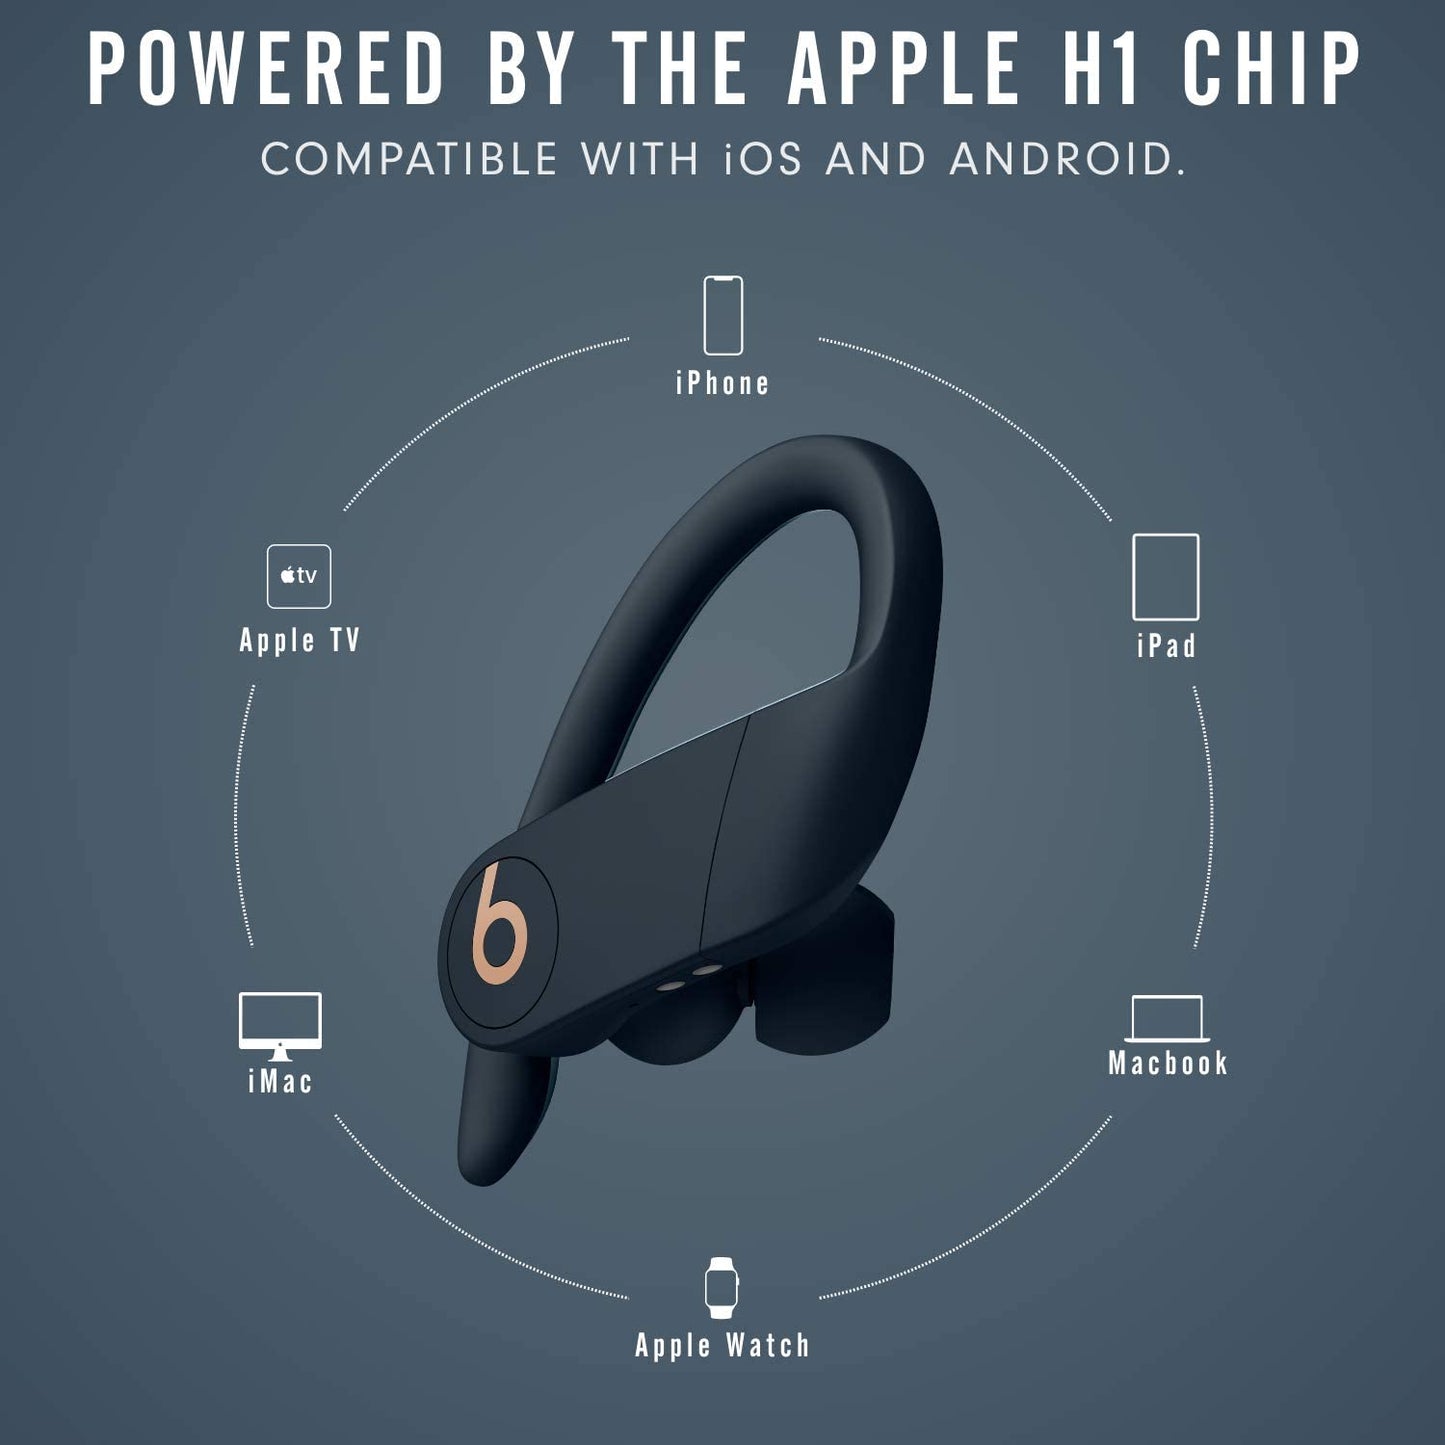 Power Pro Wireless Earphones - Apple H1 Headphone Chip, Class 1 Bluetooth, 9 Hours of Listening Time, Sweat Resistant Earbuds, Built-In Microphone - Navy